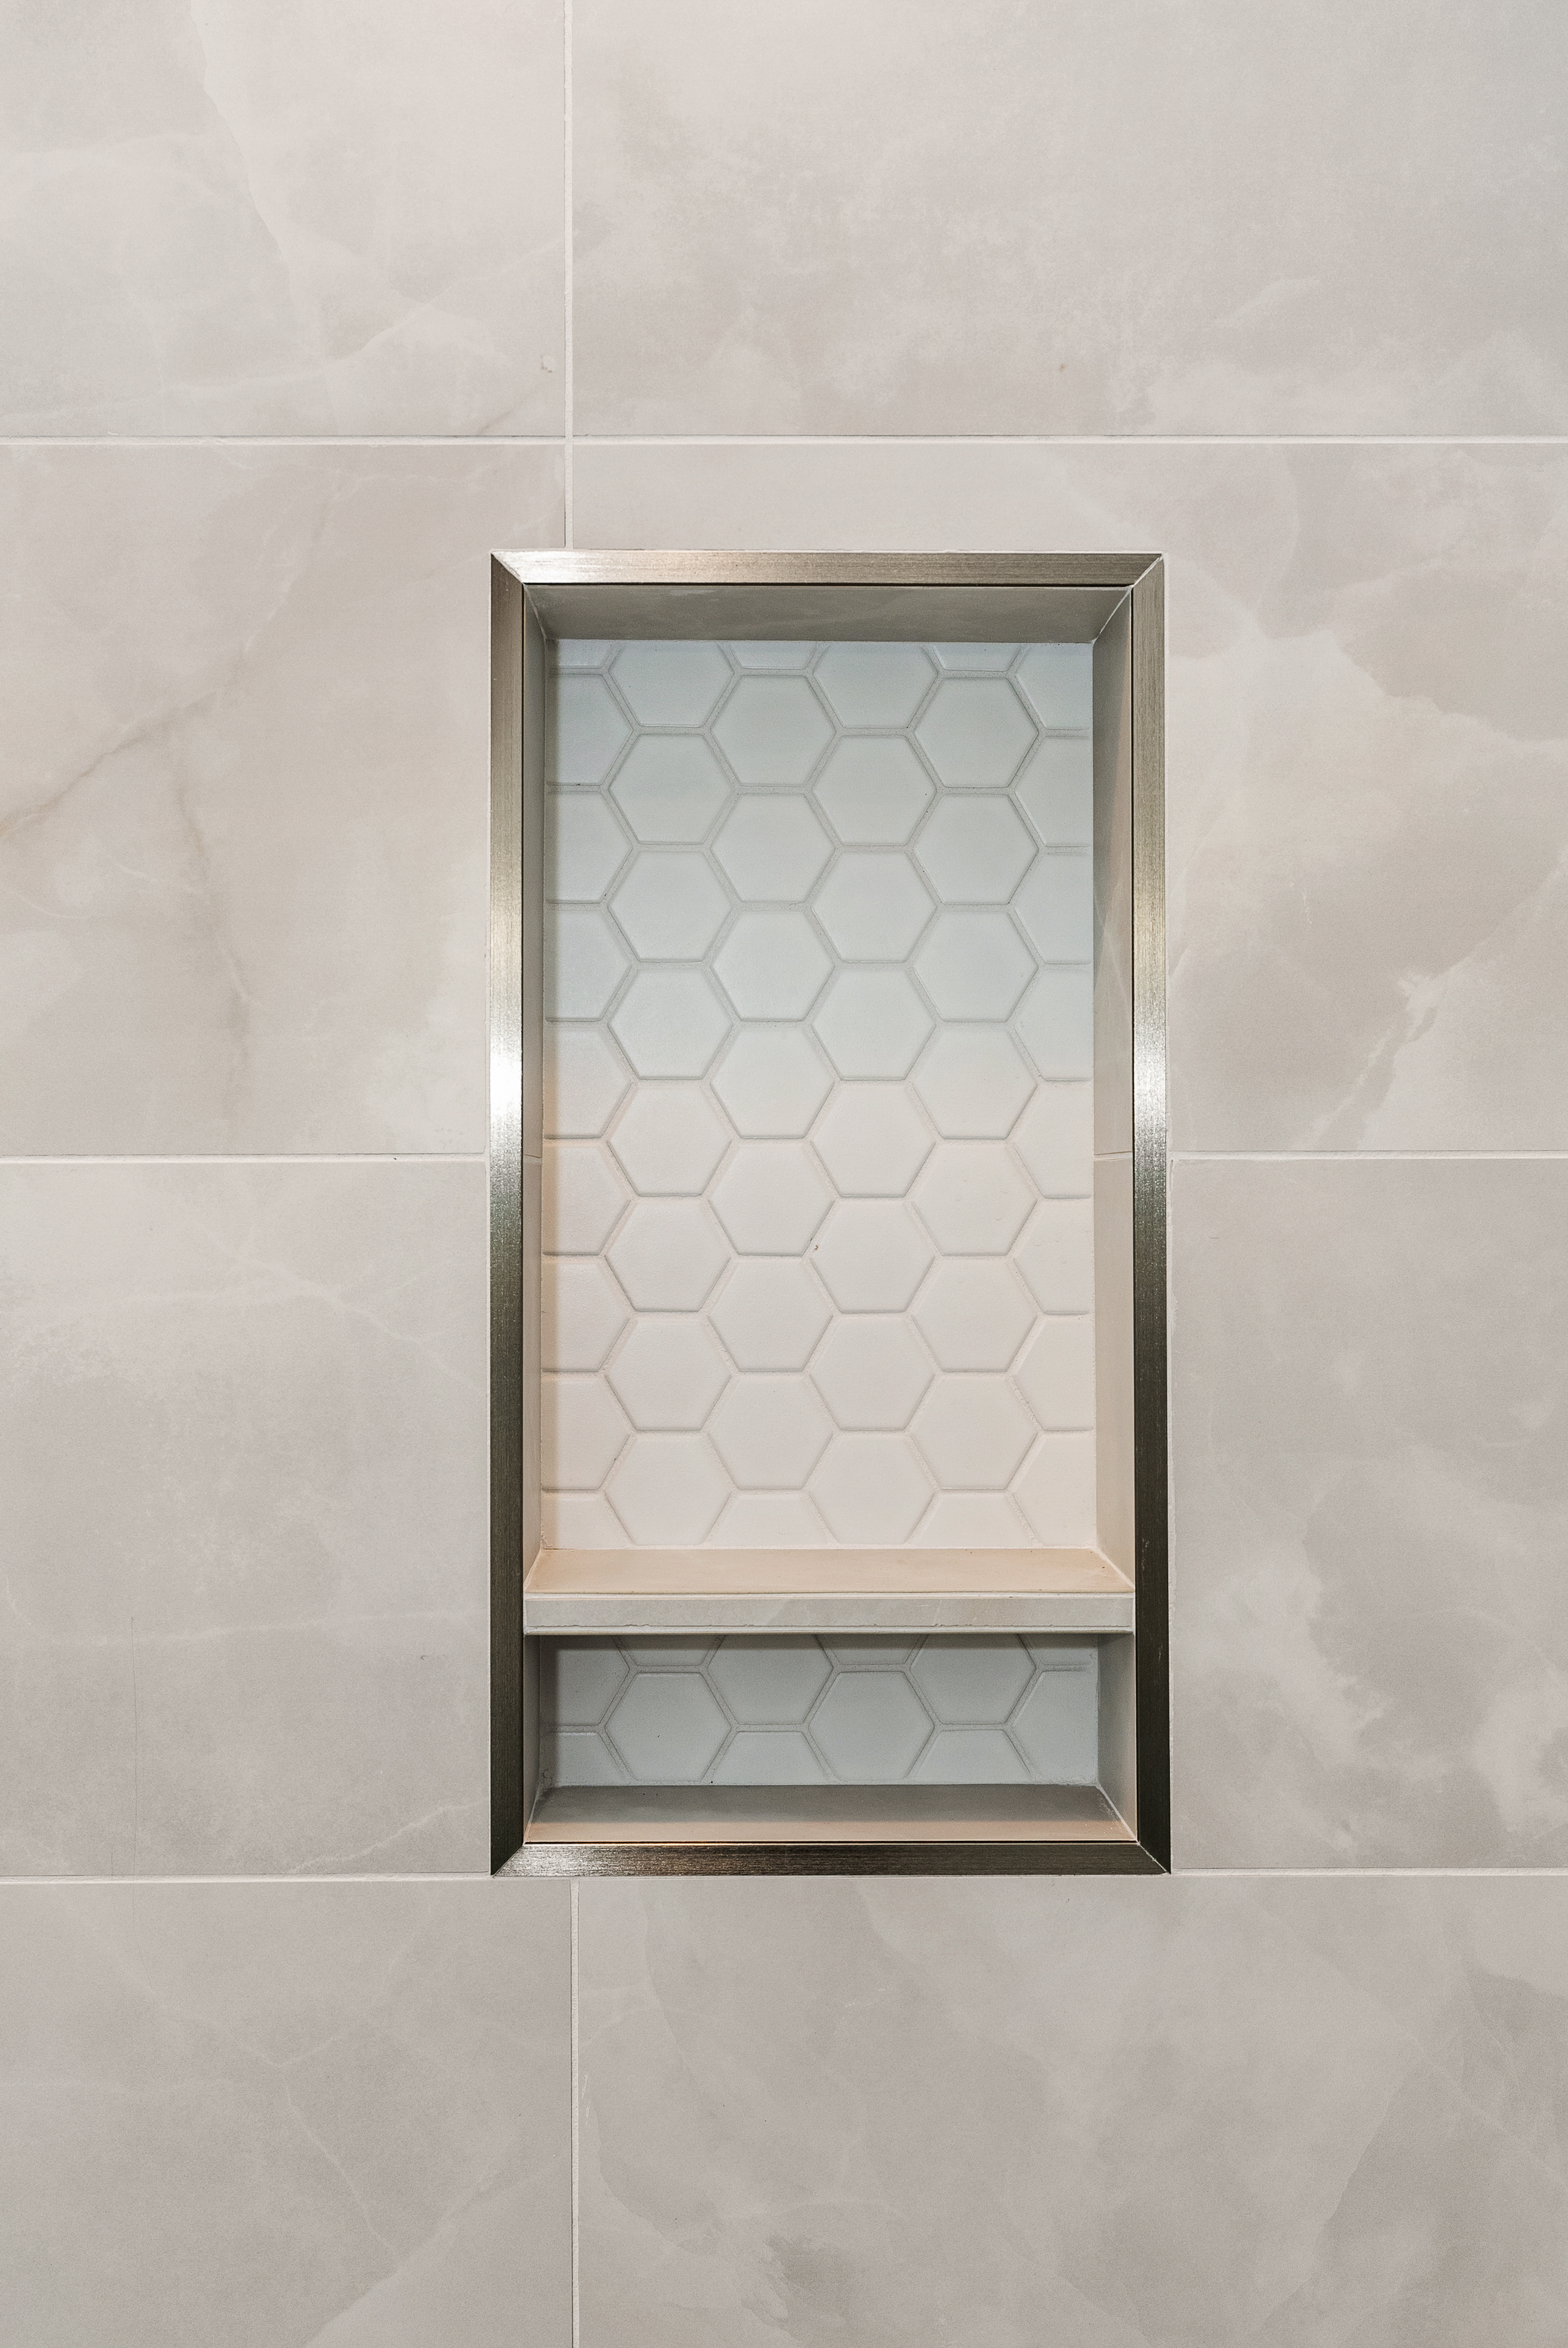 Custom-built niche with brushed metal edge and porcelain tiles